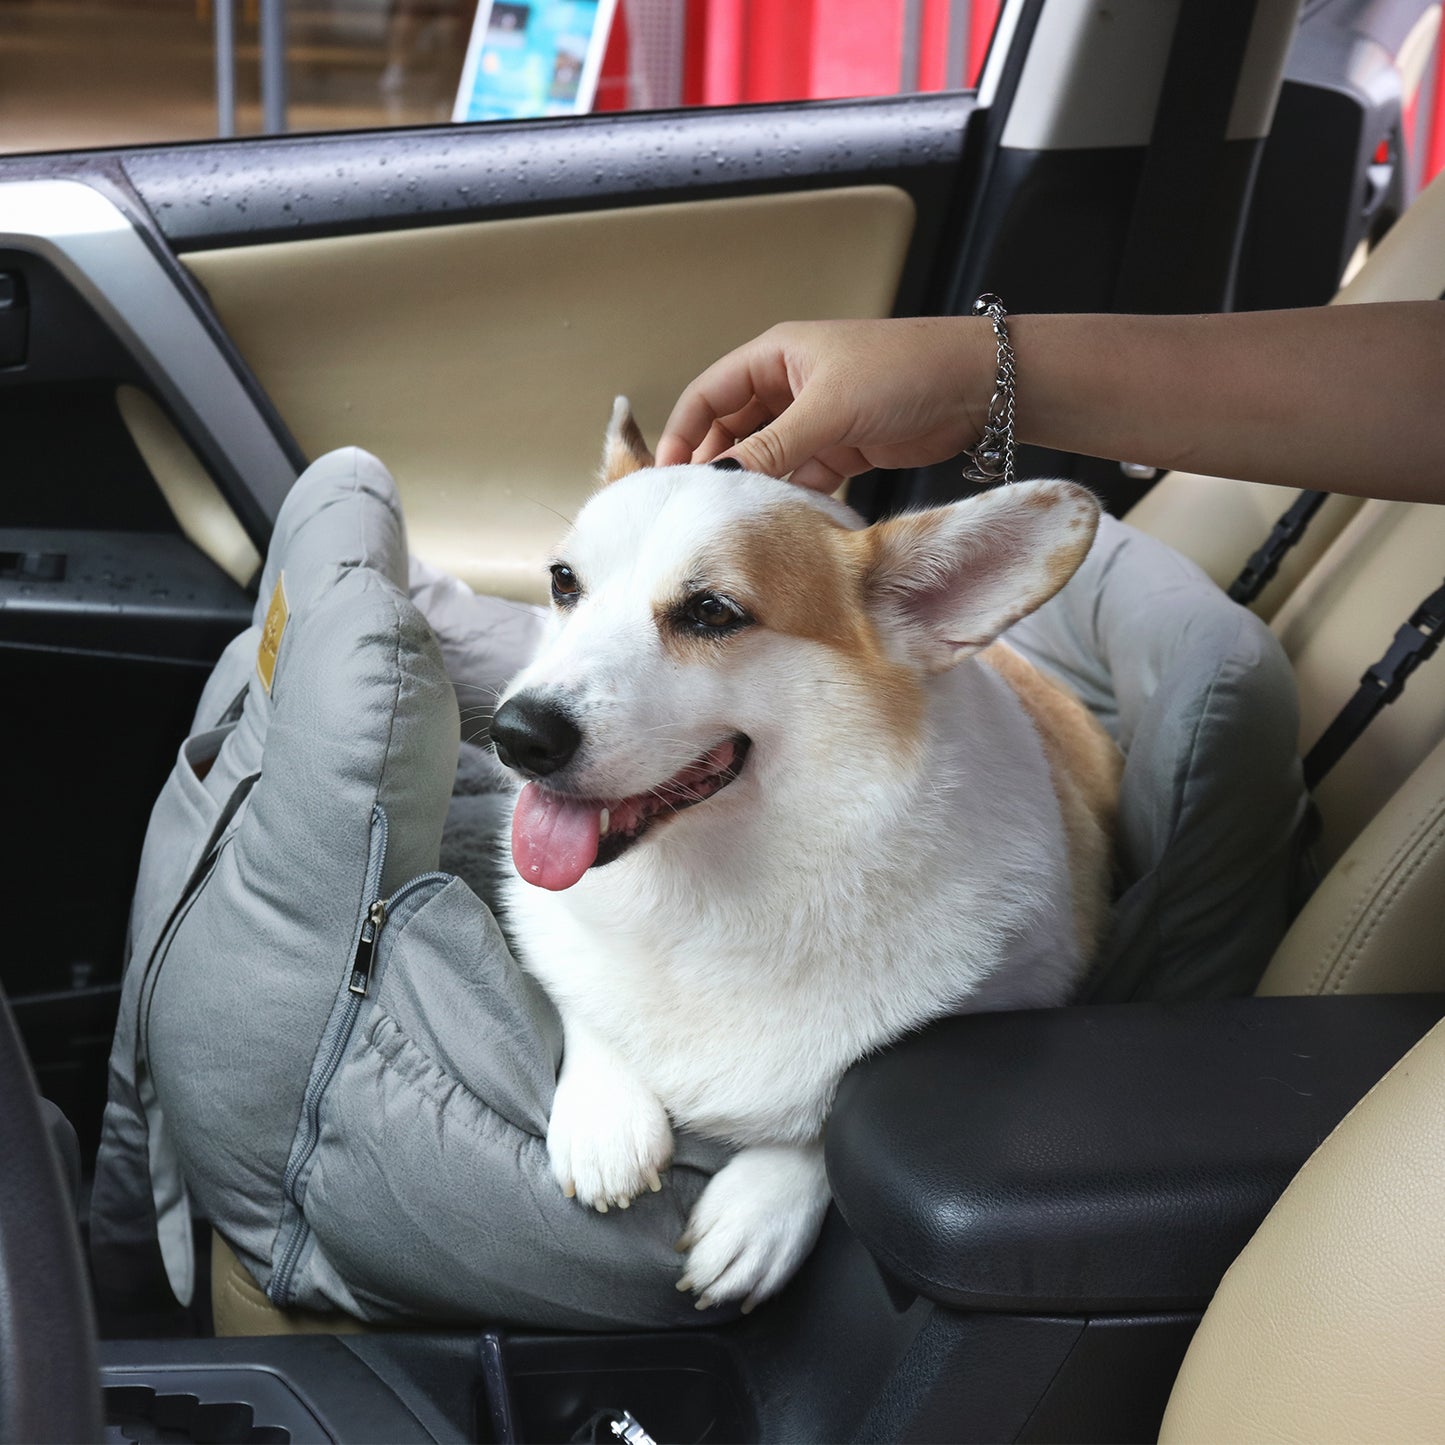 Pet Car Seat: Semi-closed Dog Pet Travel Bed Car Booter Seat with Handle and Safety Belt for Small Animals, Outdoor Trips